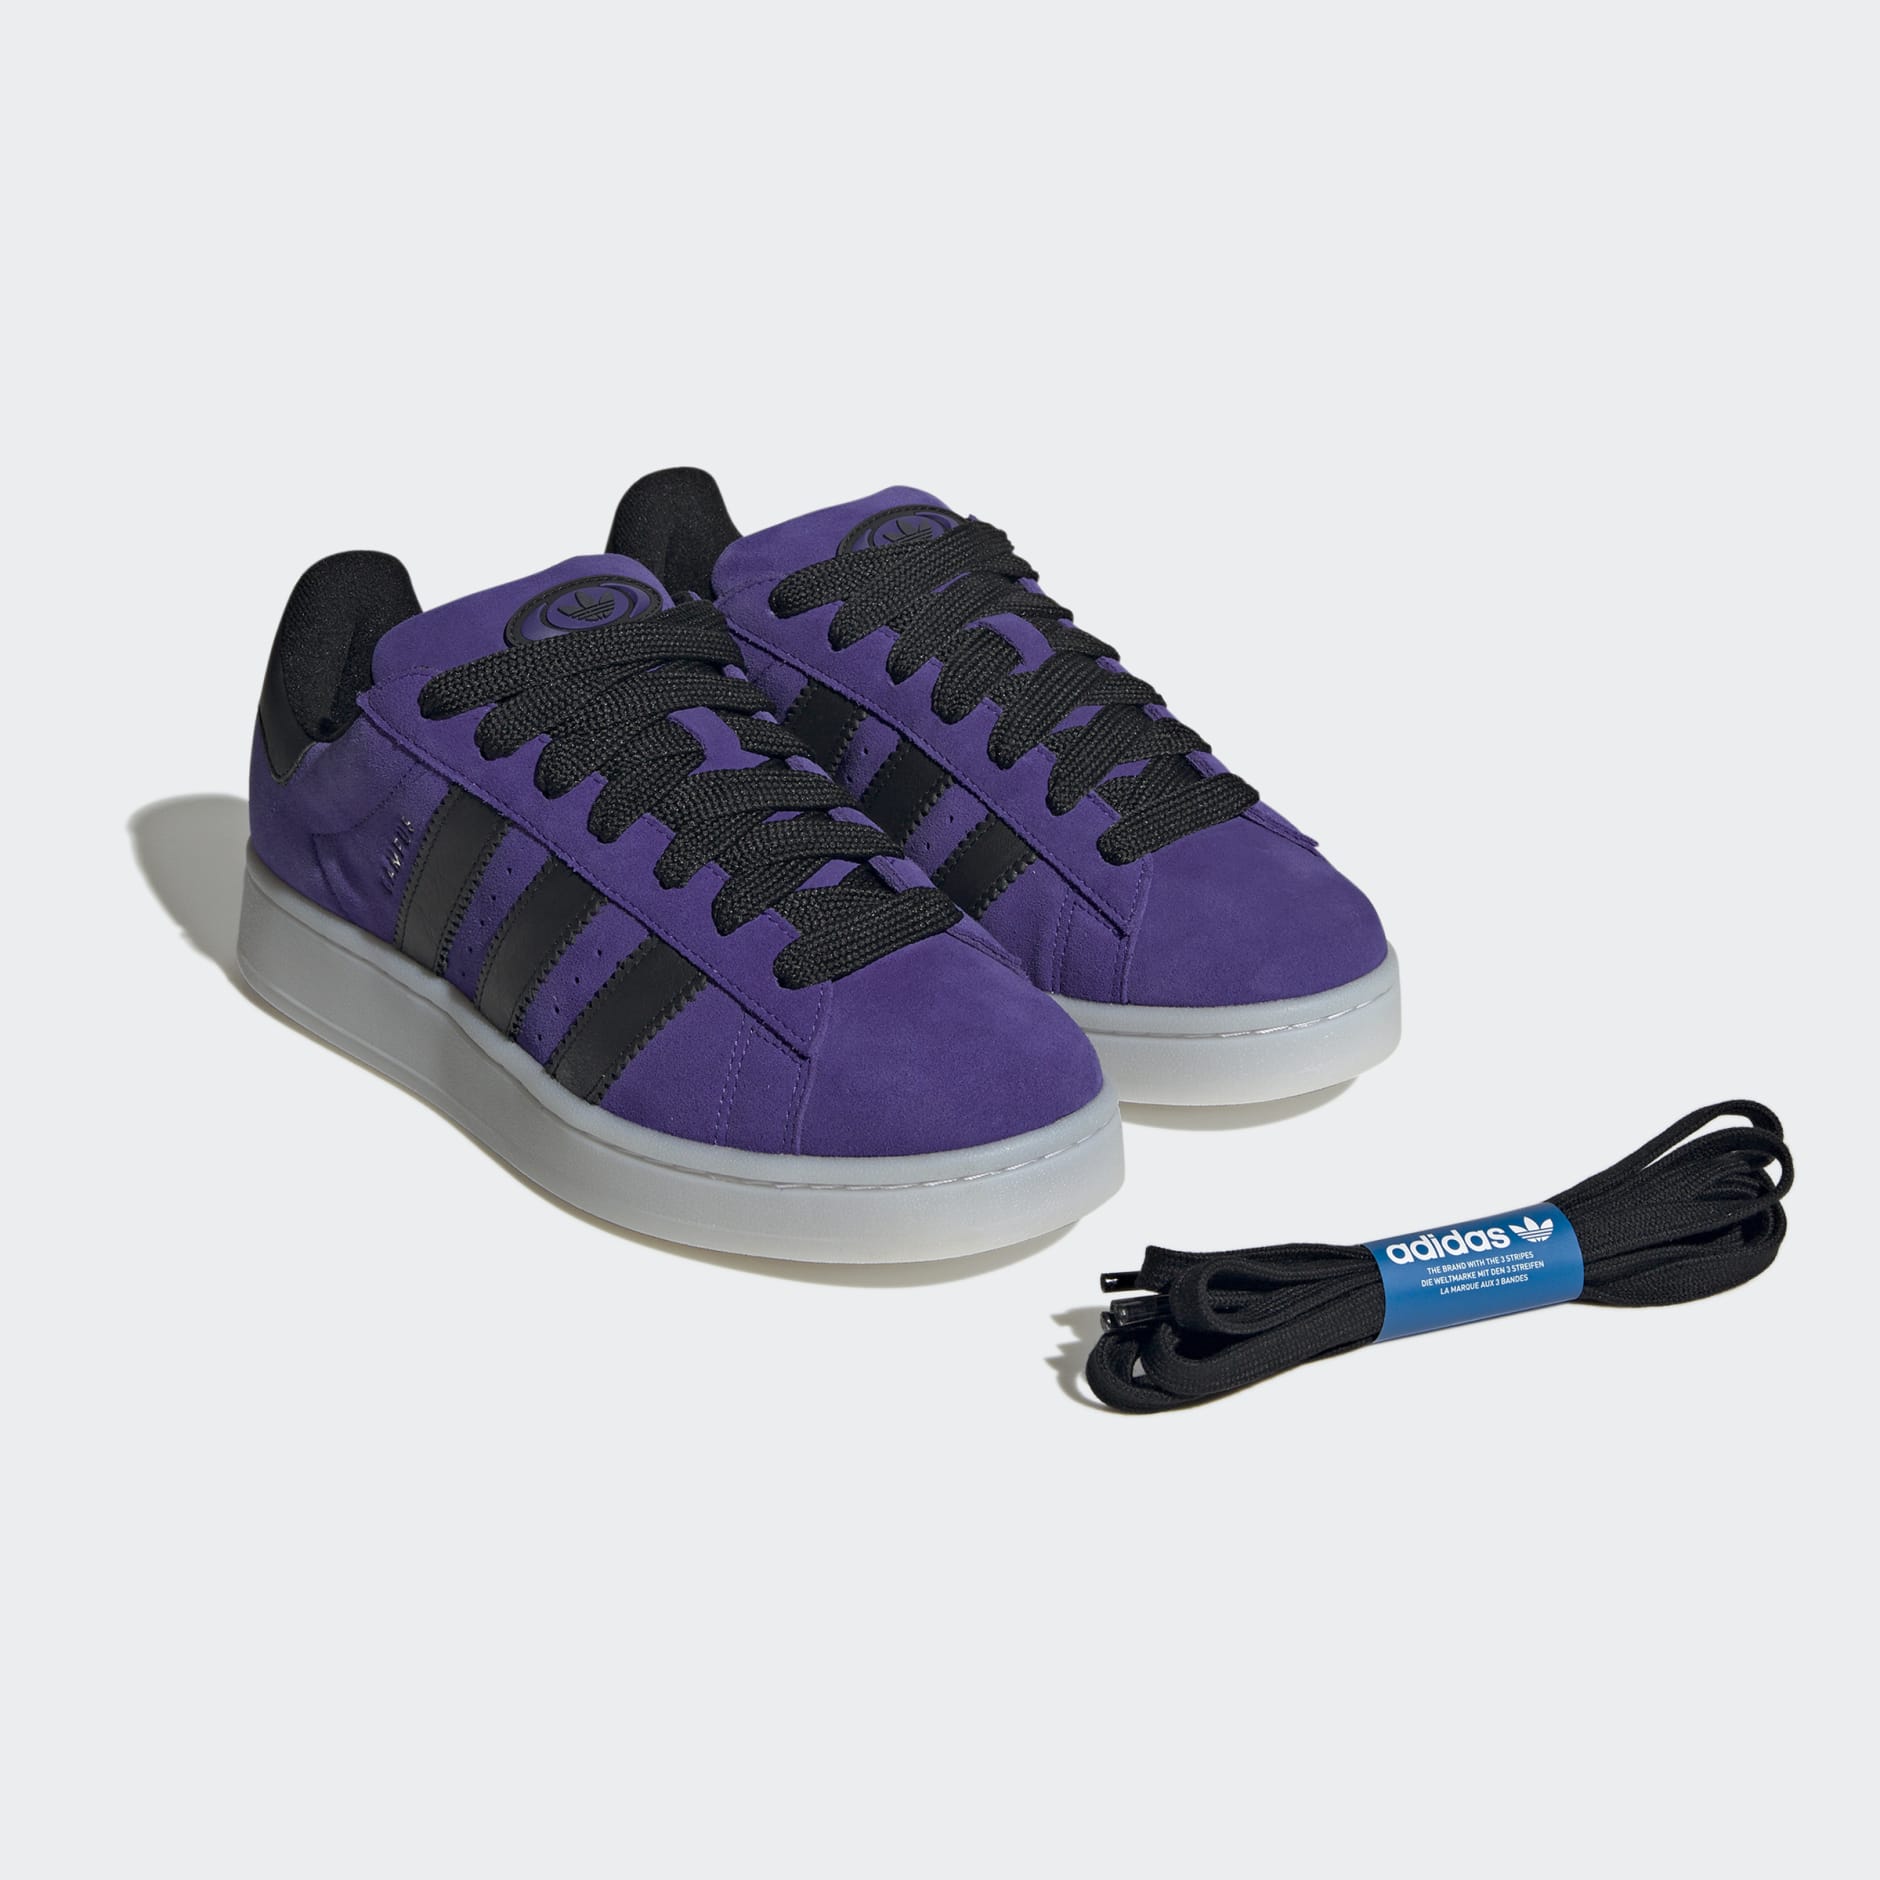 Shoes - Campus 00s Shoes - Purple | adidas South Africa